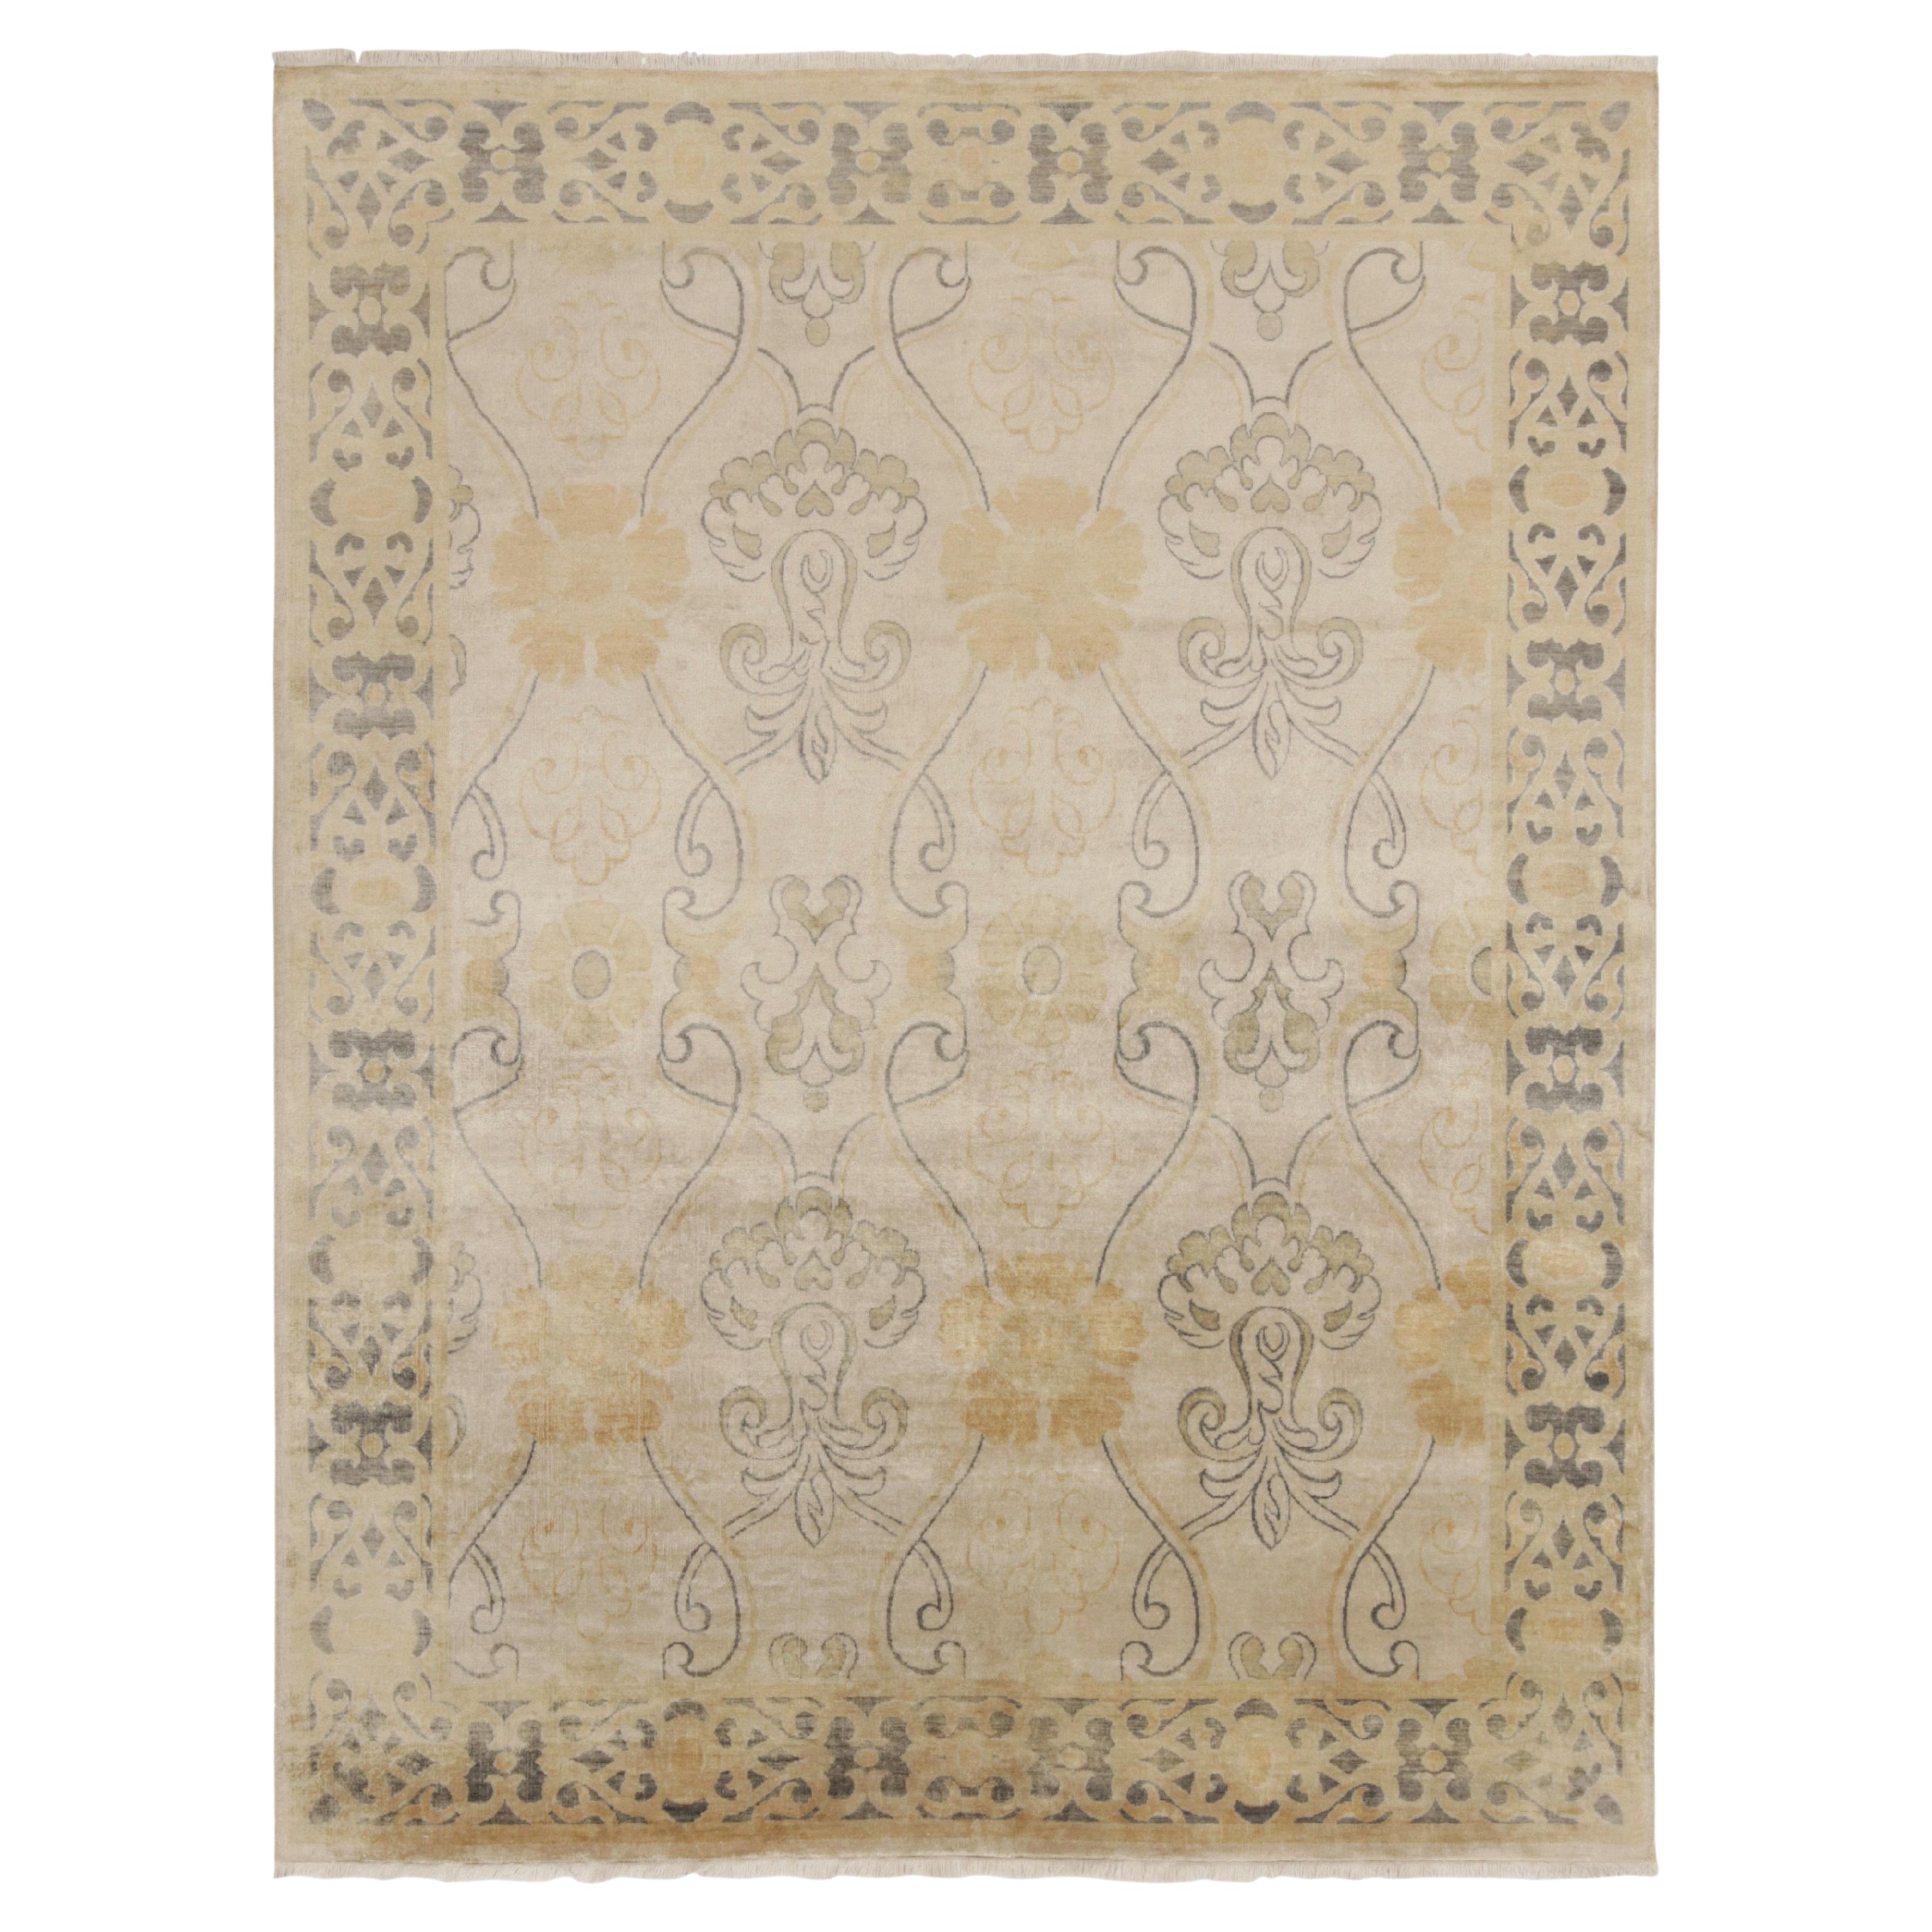 Rug & Kilim’s Art Nouveau Style Rug in Beige with Gold Trellis Floral Patterns For Sale